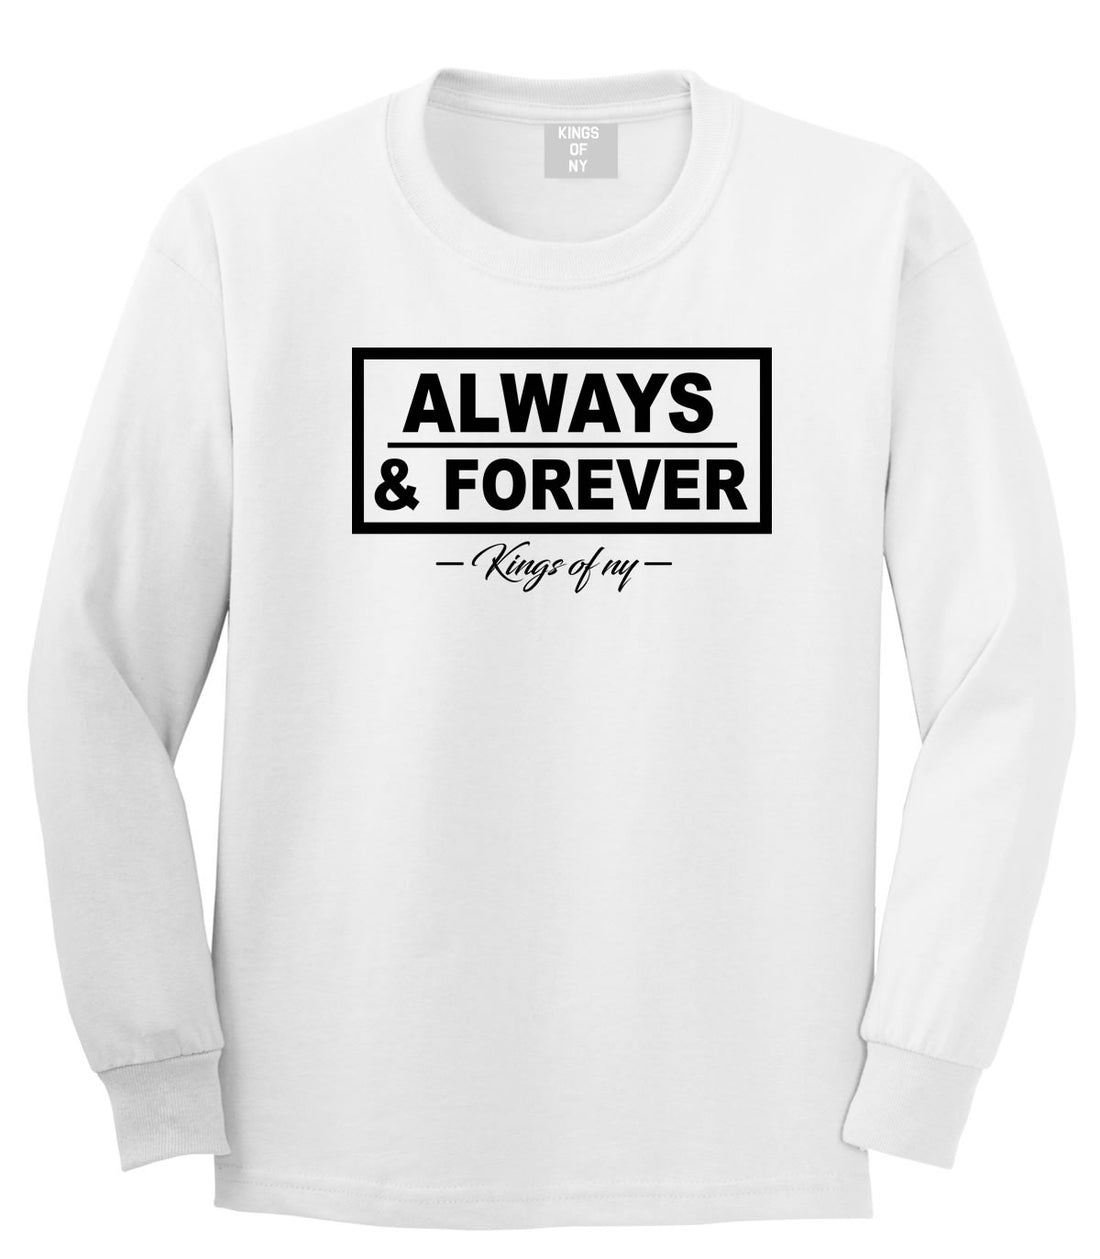 Always and Forever Long Sleeve T-Shirt